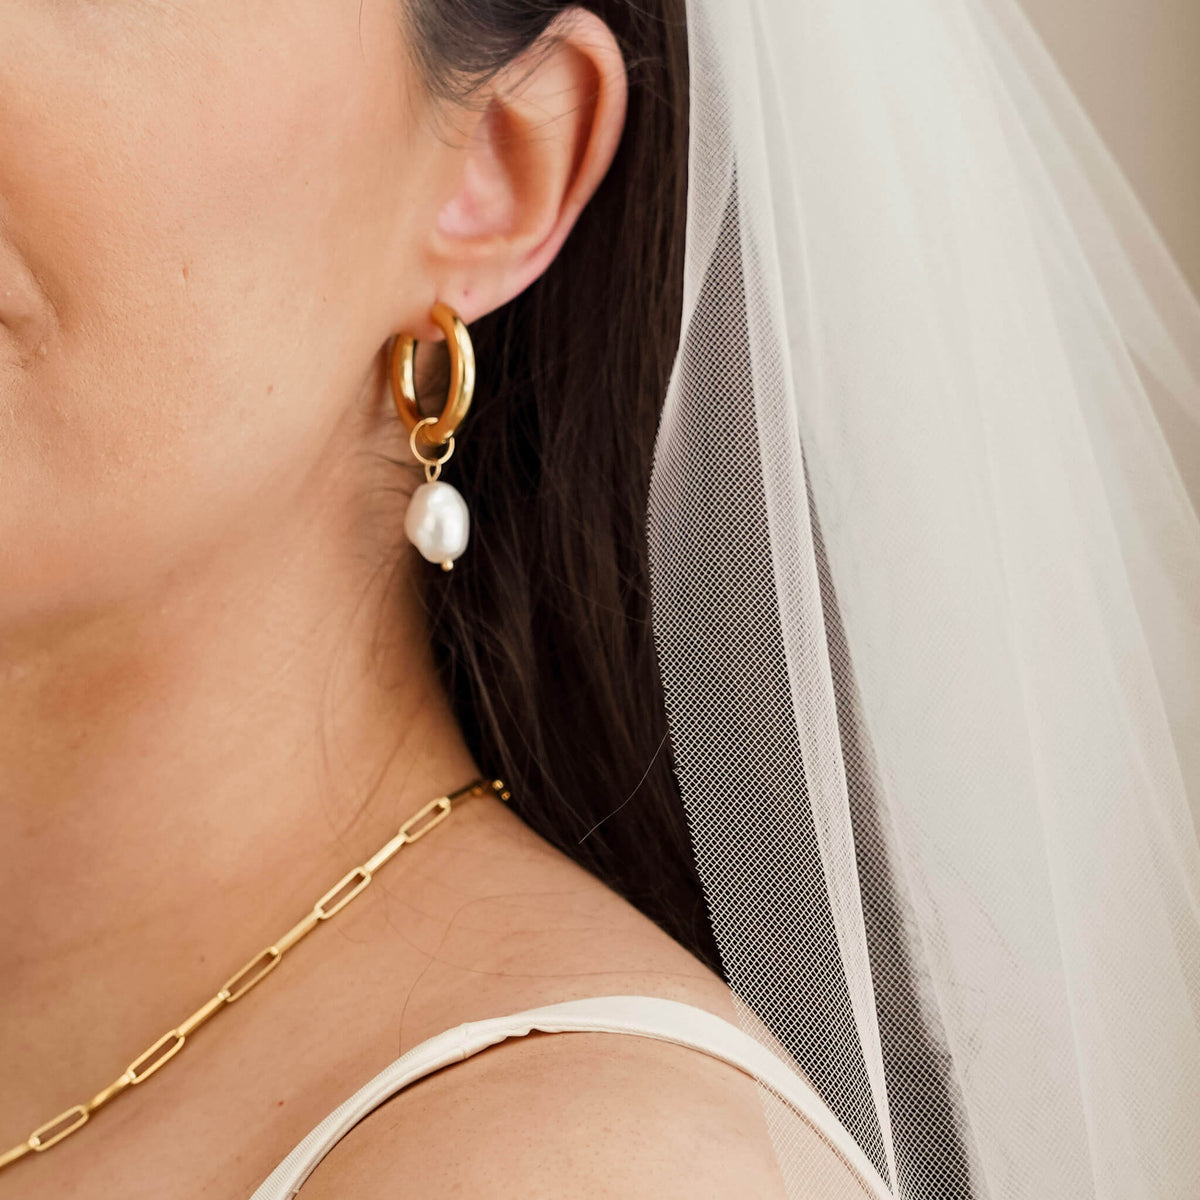 Bride is wearing gold hoop earrings with a dangling pearl. The pearl can be removed.